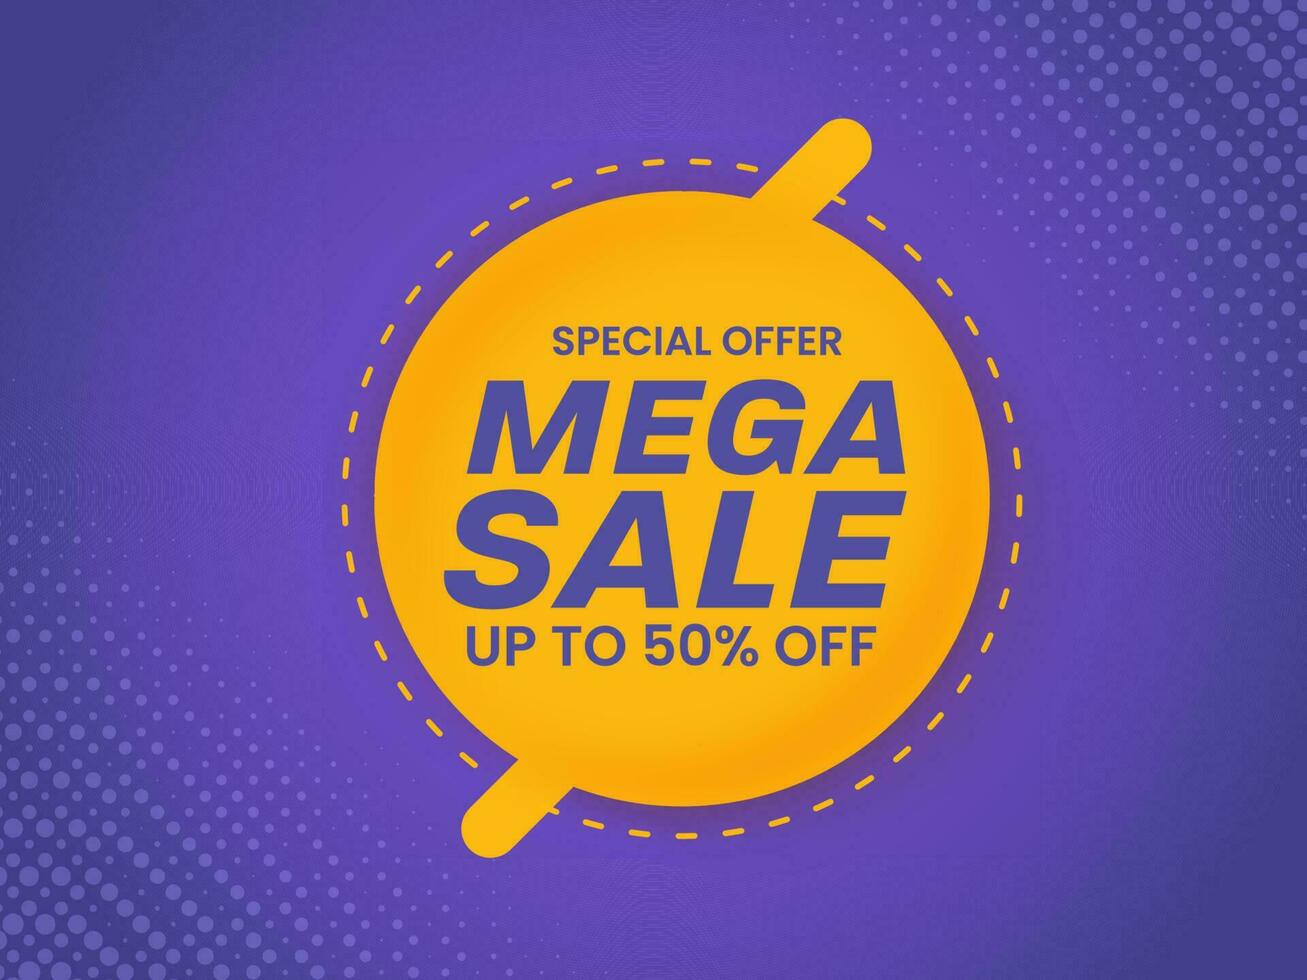 Mega Sale Poster Design With Discount Offer On Violet And Yellow Halftone Background. vector